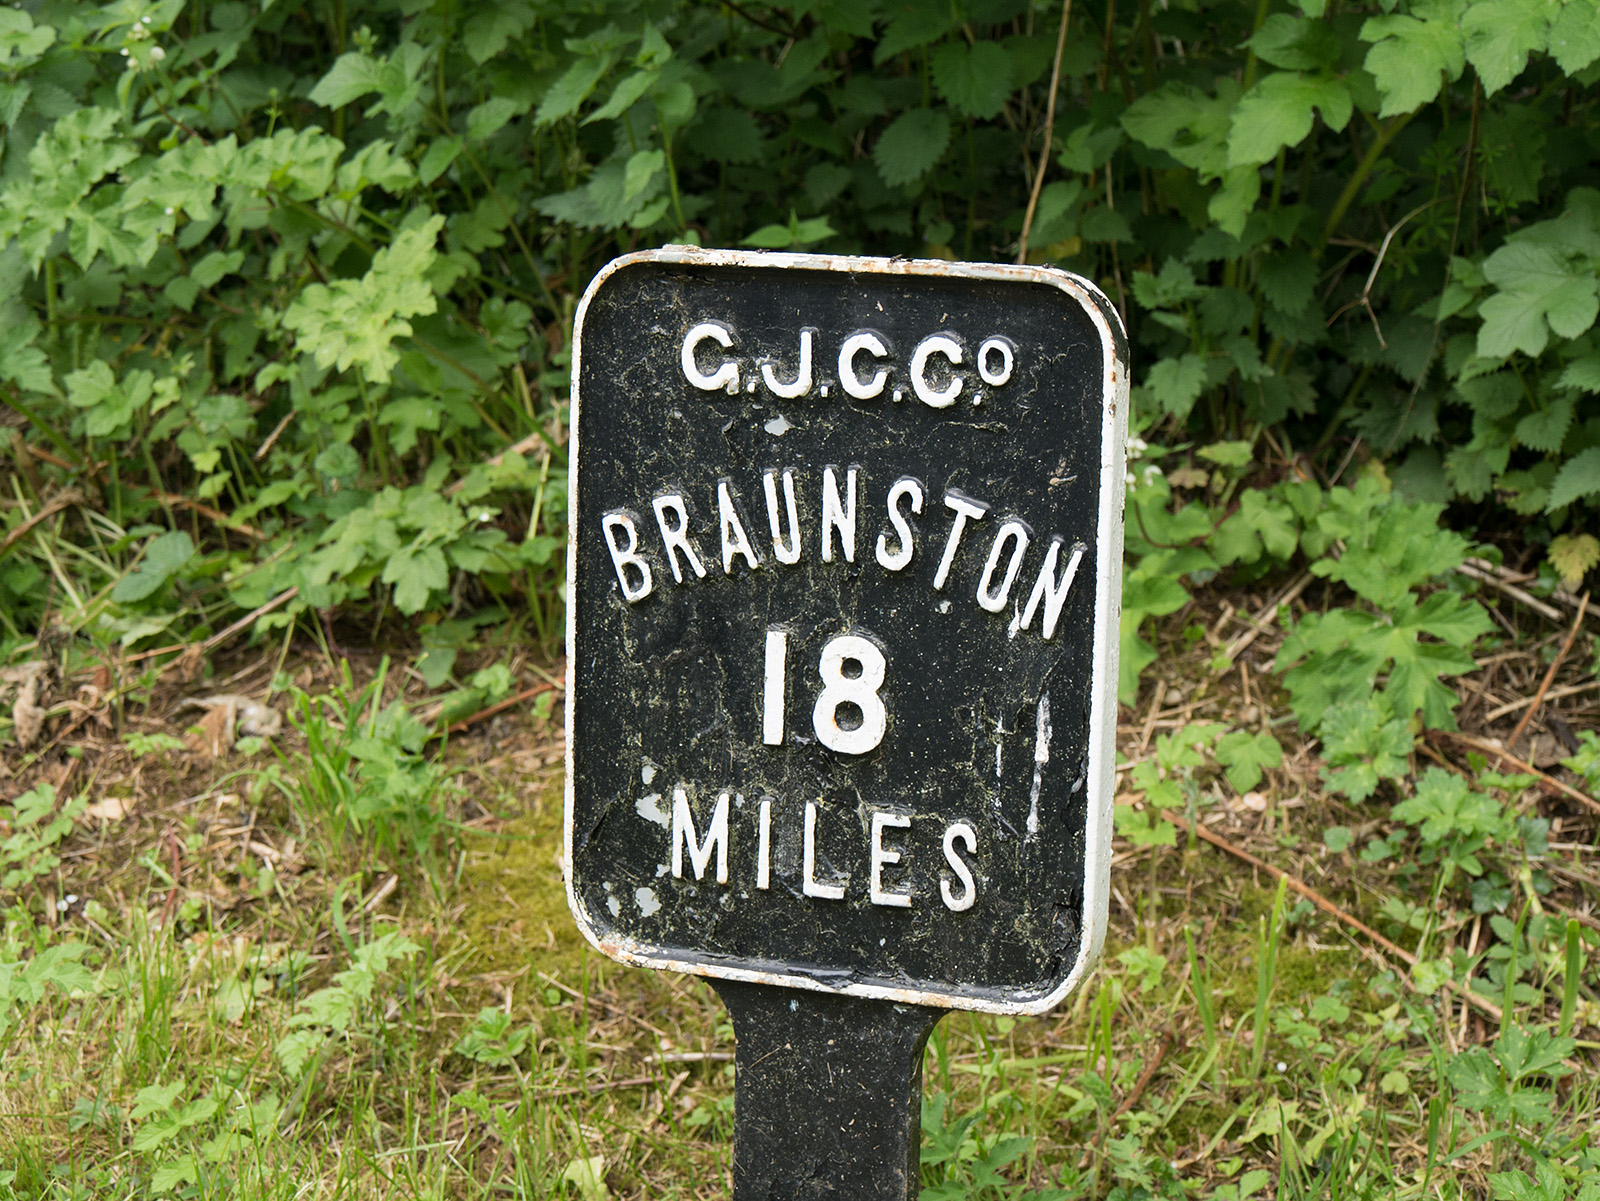 Only 18 miles to Braunstone junction